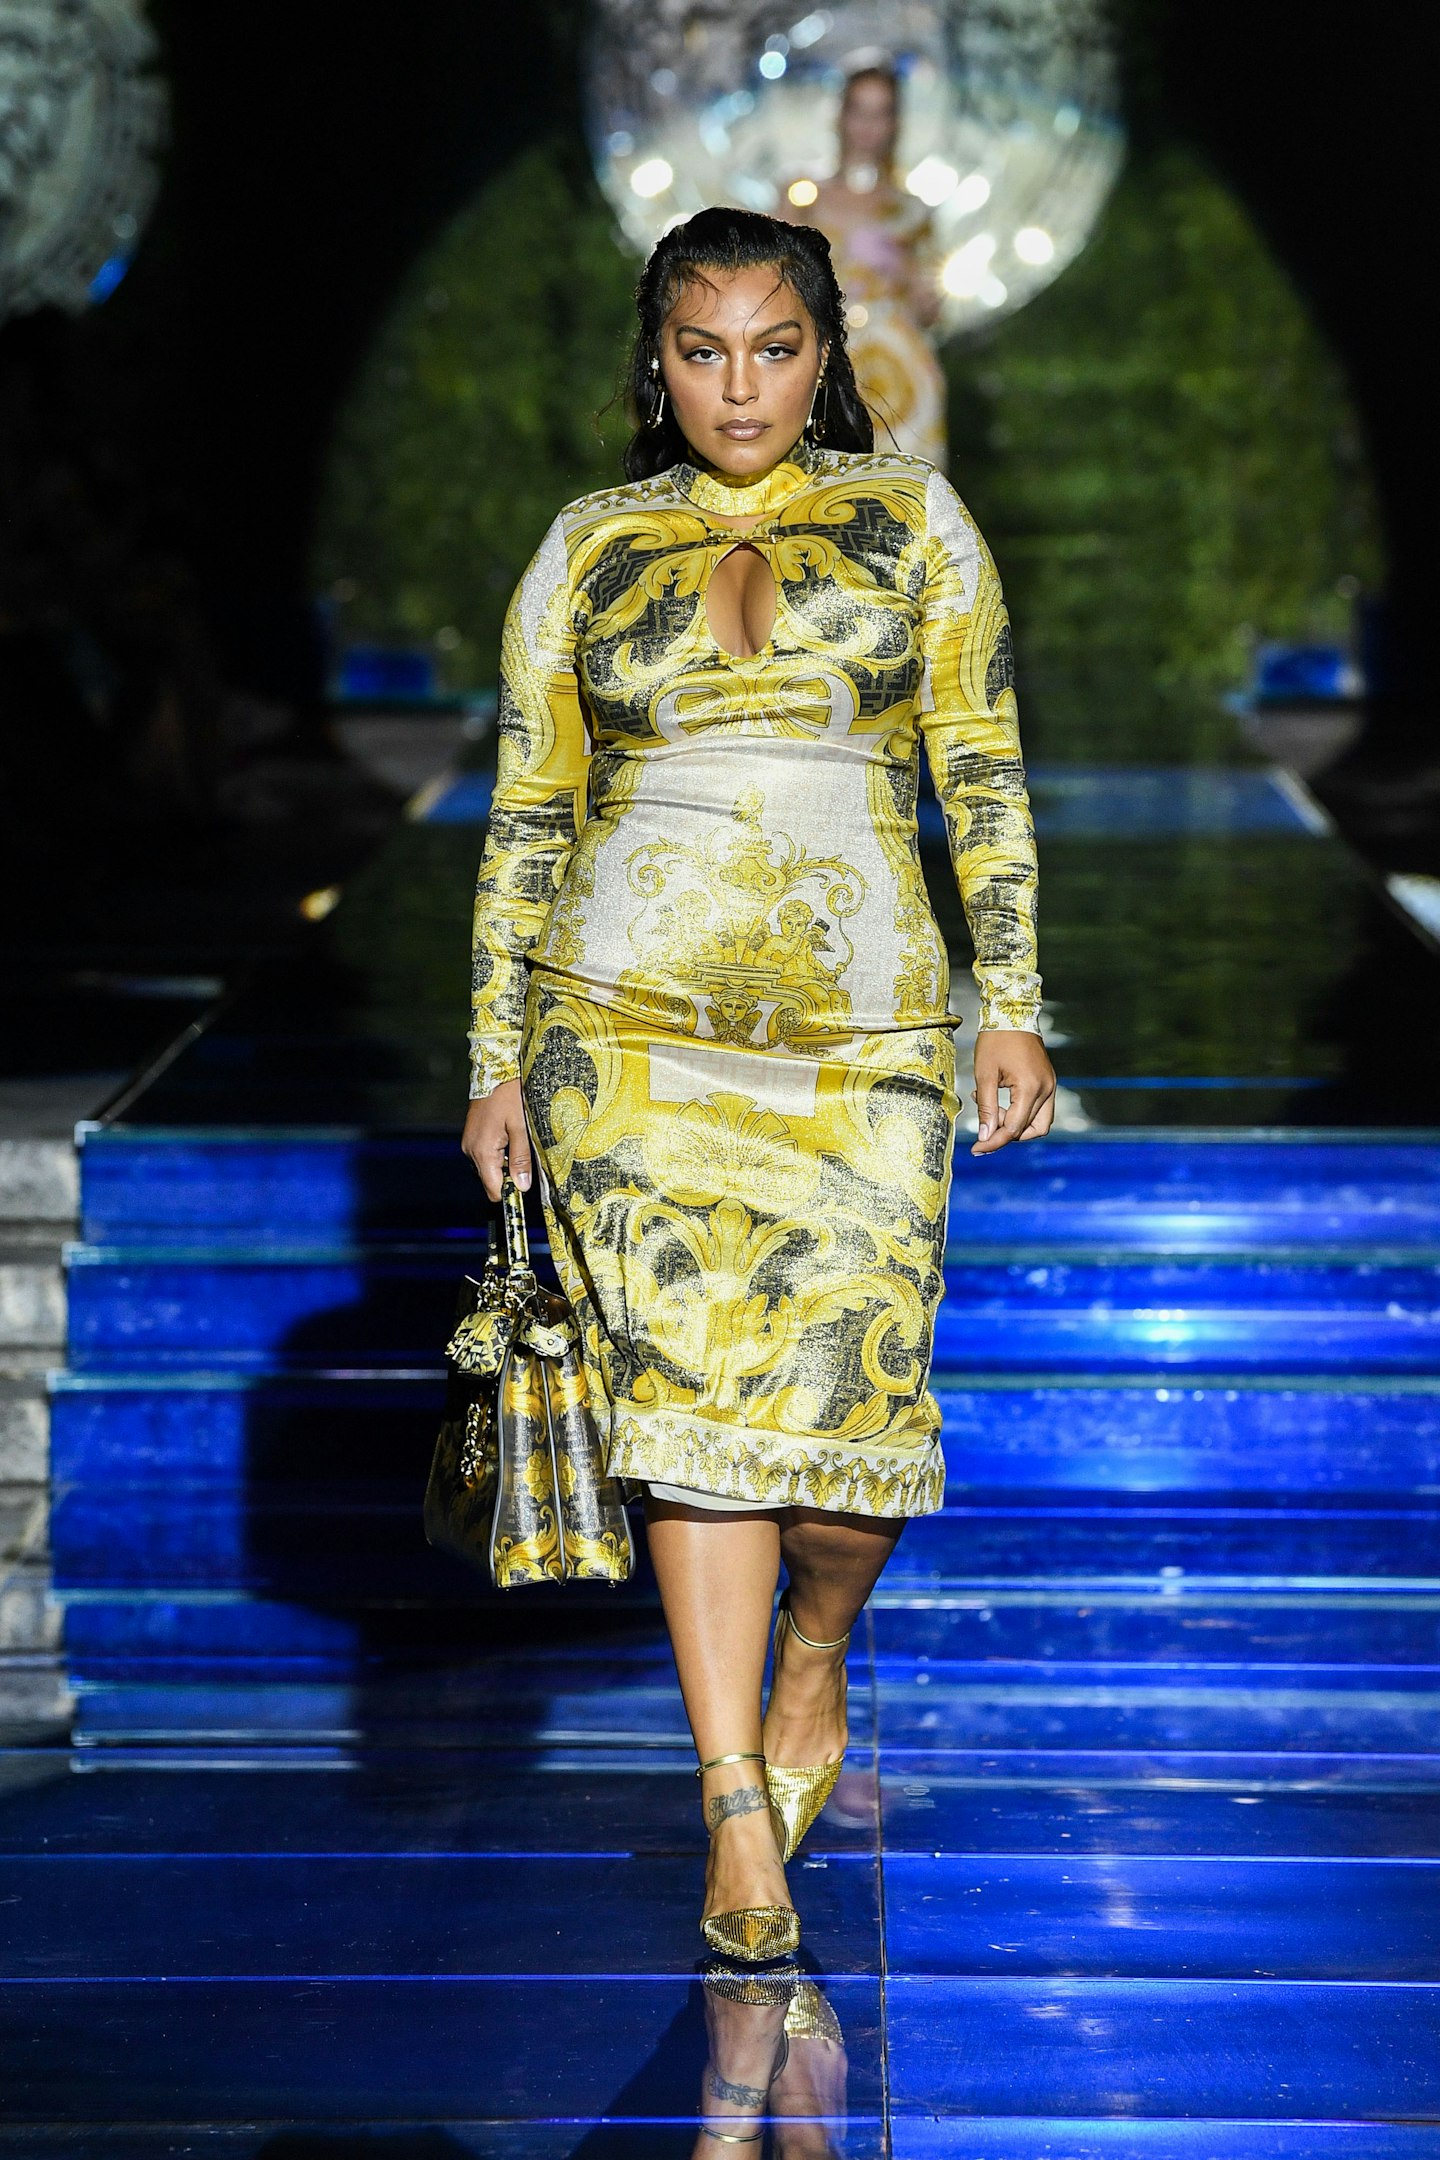 Paloma Elsesser on the catwalk at Versace by Fendi